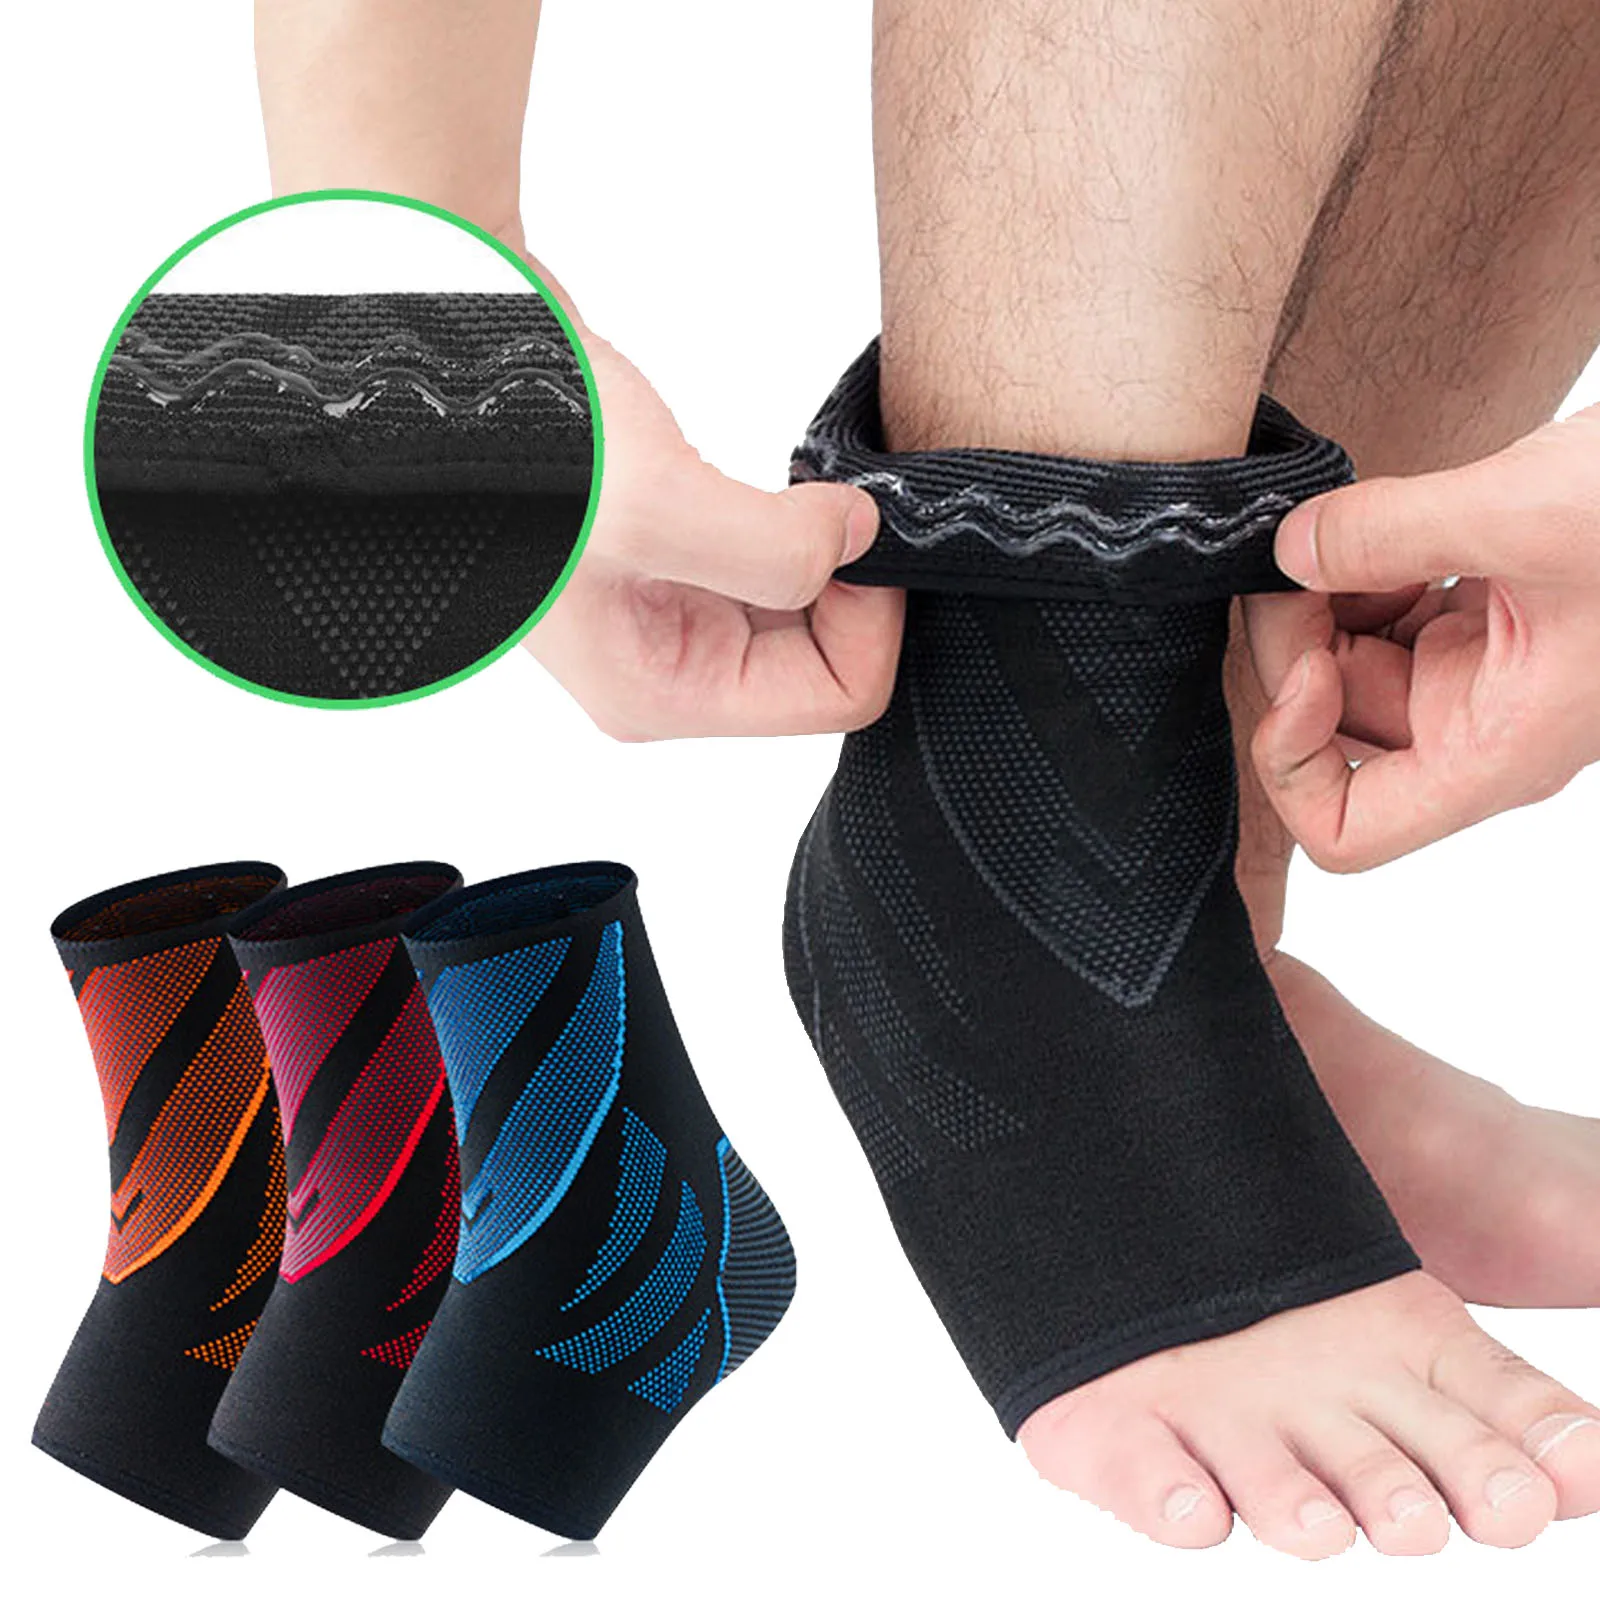 1Pairs Ankle Brace Compression Sleeves for Football Ankle Support Socks Injury Recovery Joint Pain Plantar Fasciitis Protector bracetop 1 pair ankle support brace compression foot ankle sleeve unisex plantar fasciitis ankle socks ankle brace support sport